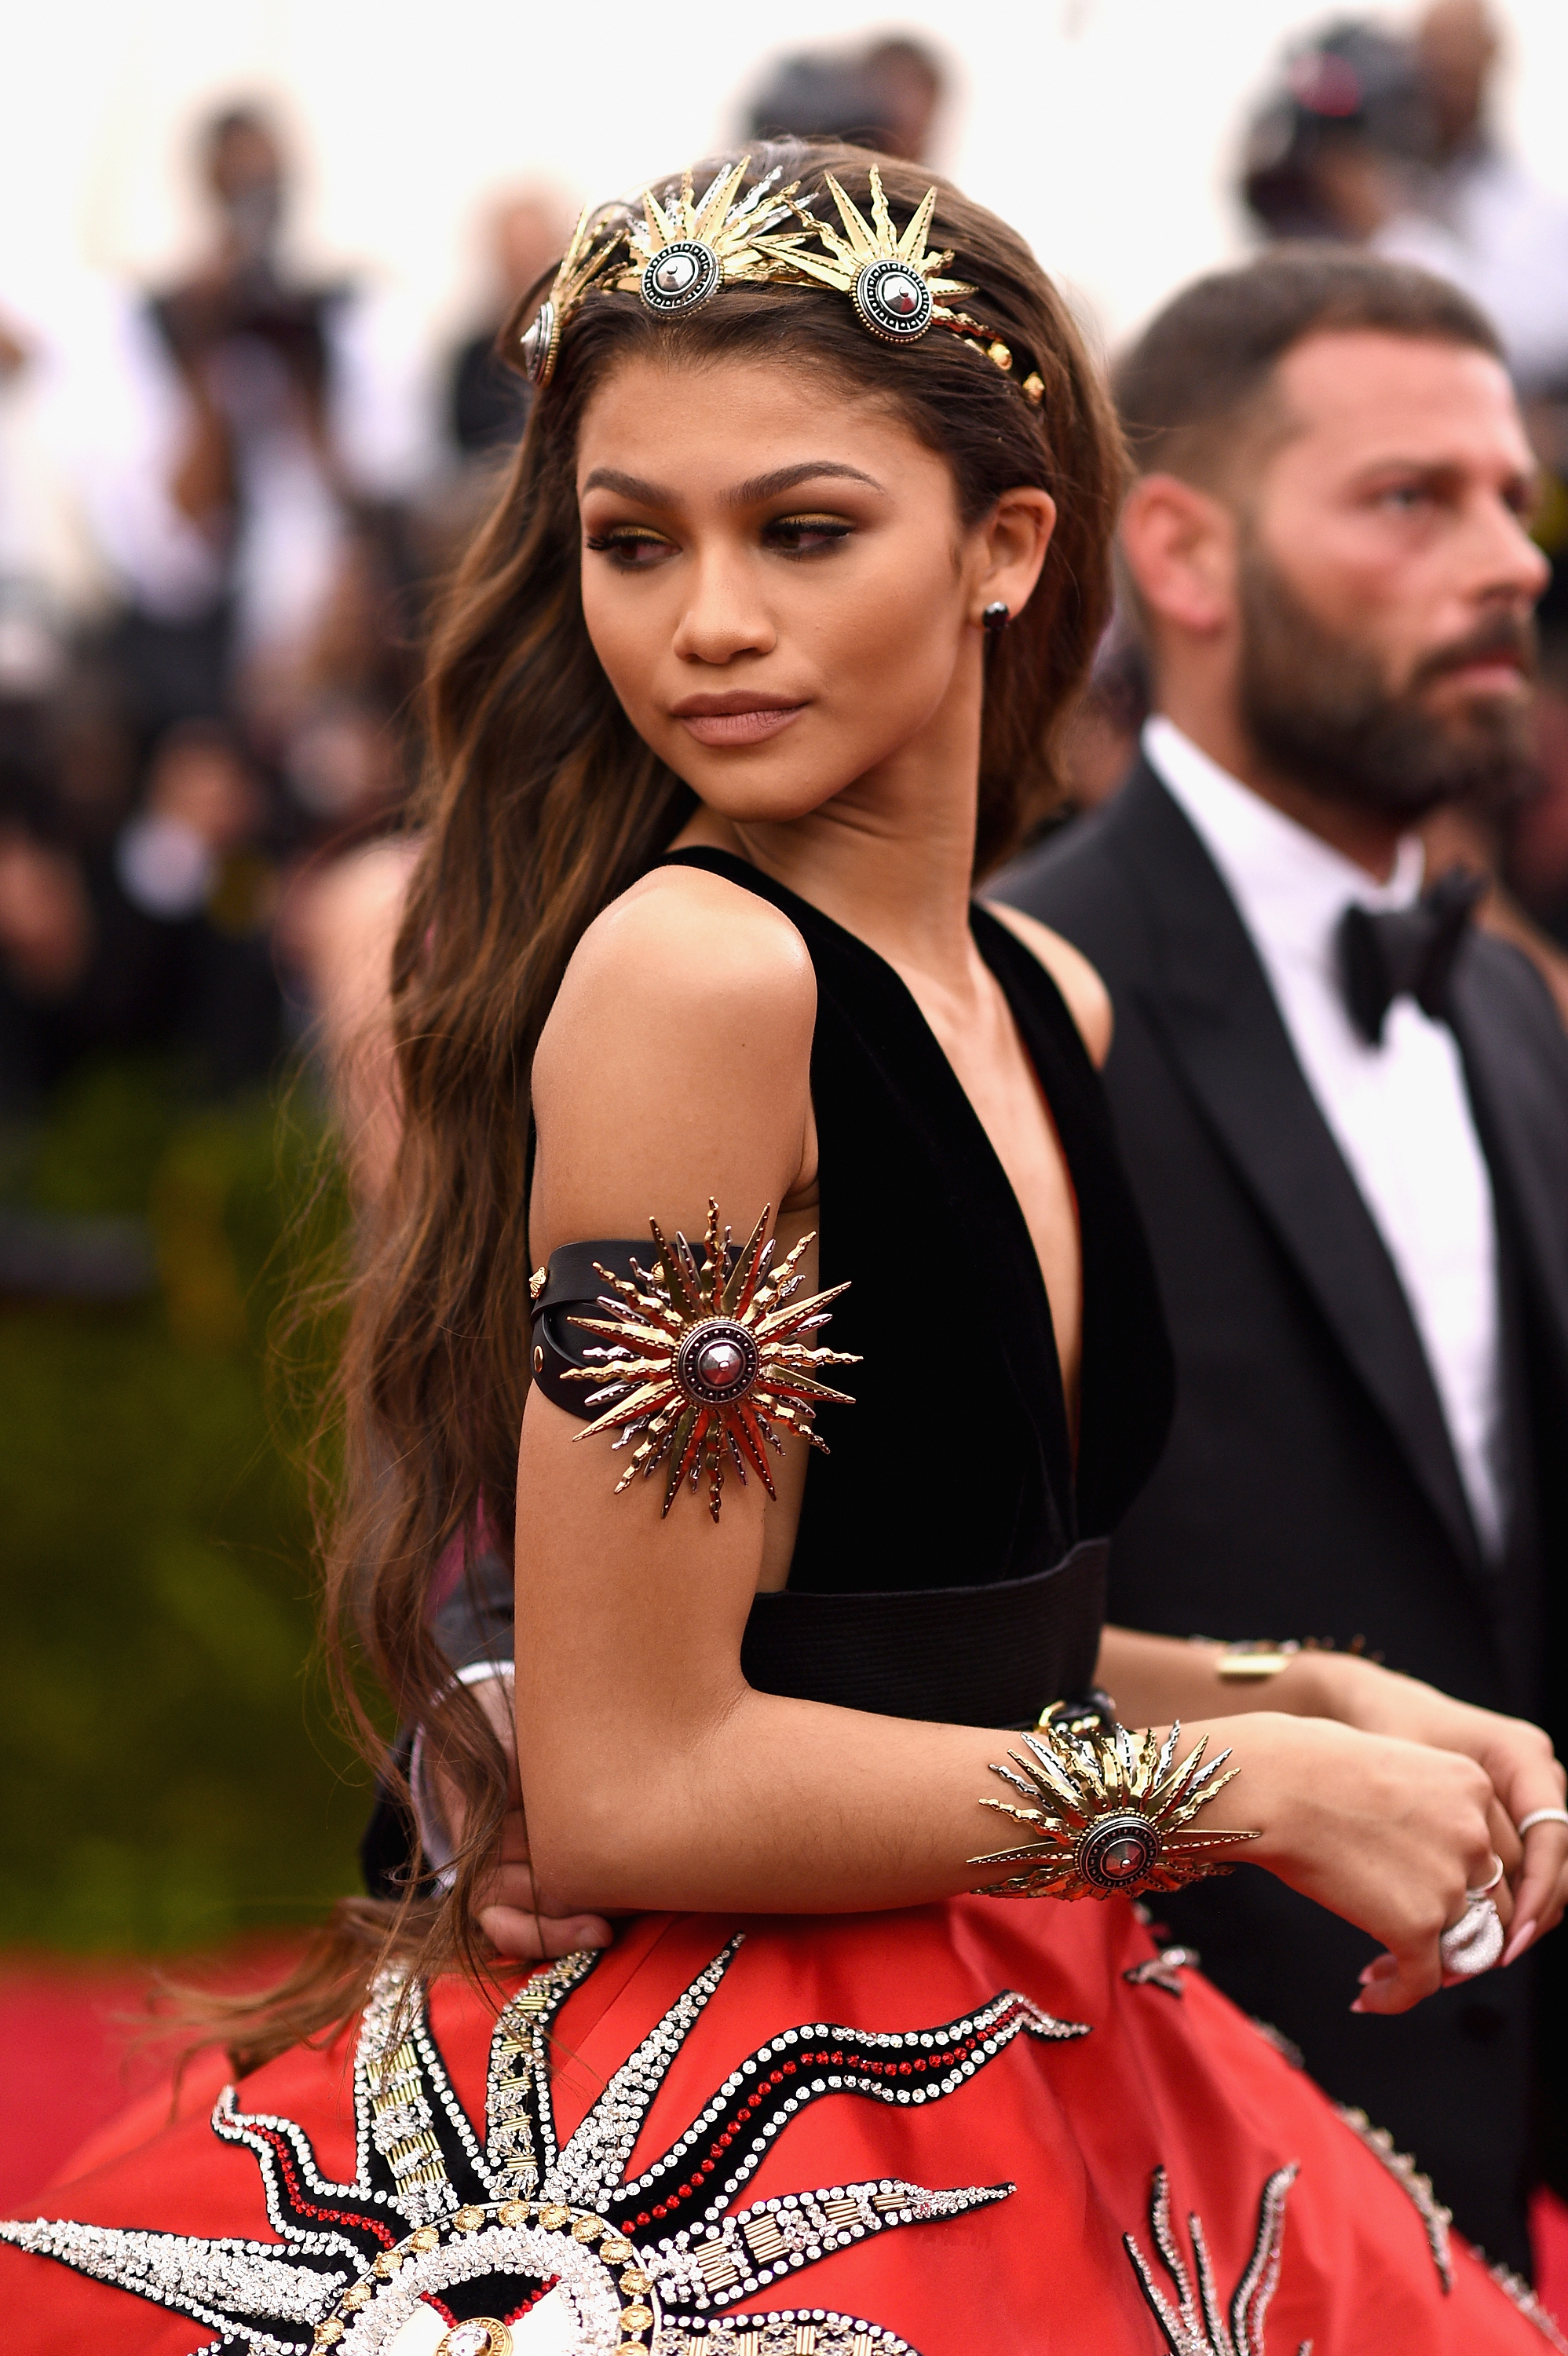 Zendaya in a black dress with embellished accents and a headpiece at a gala event